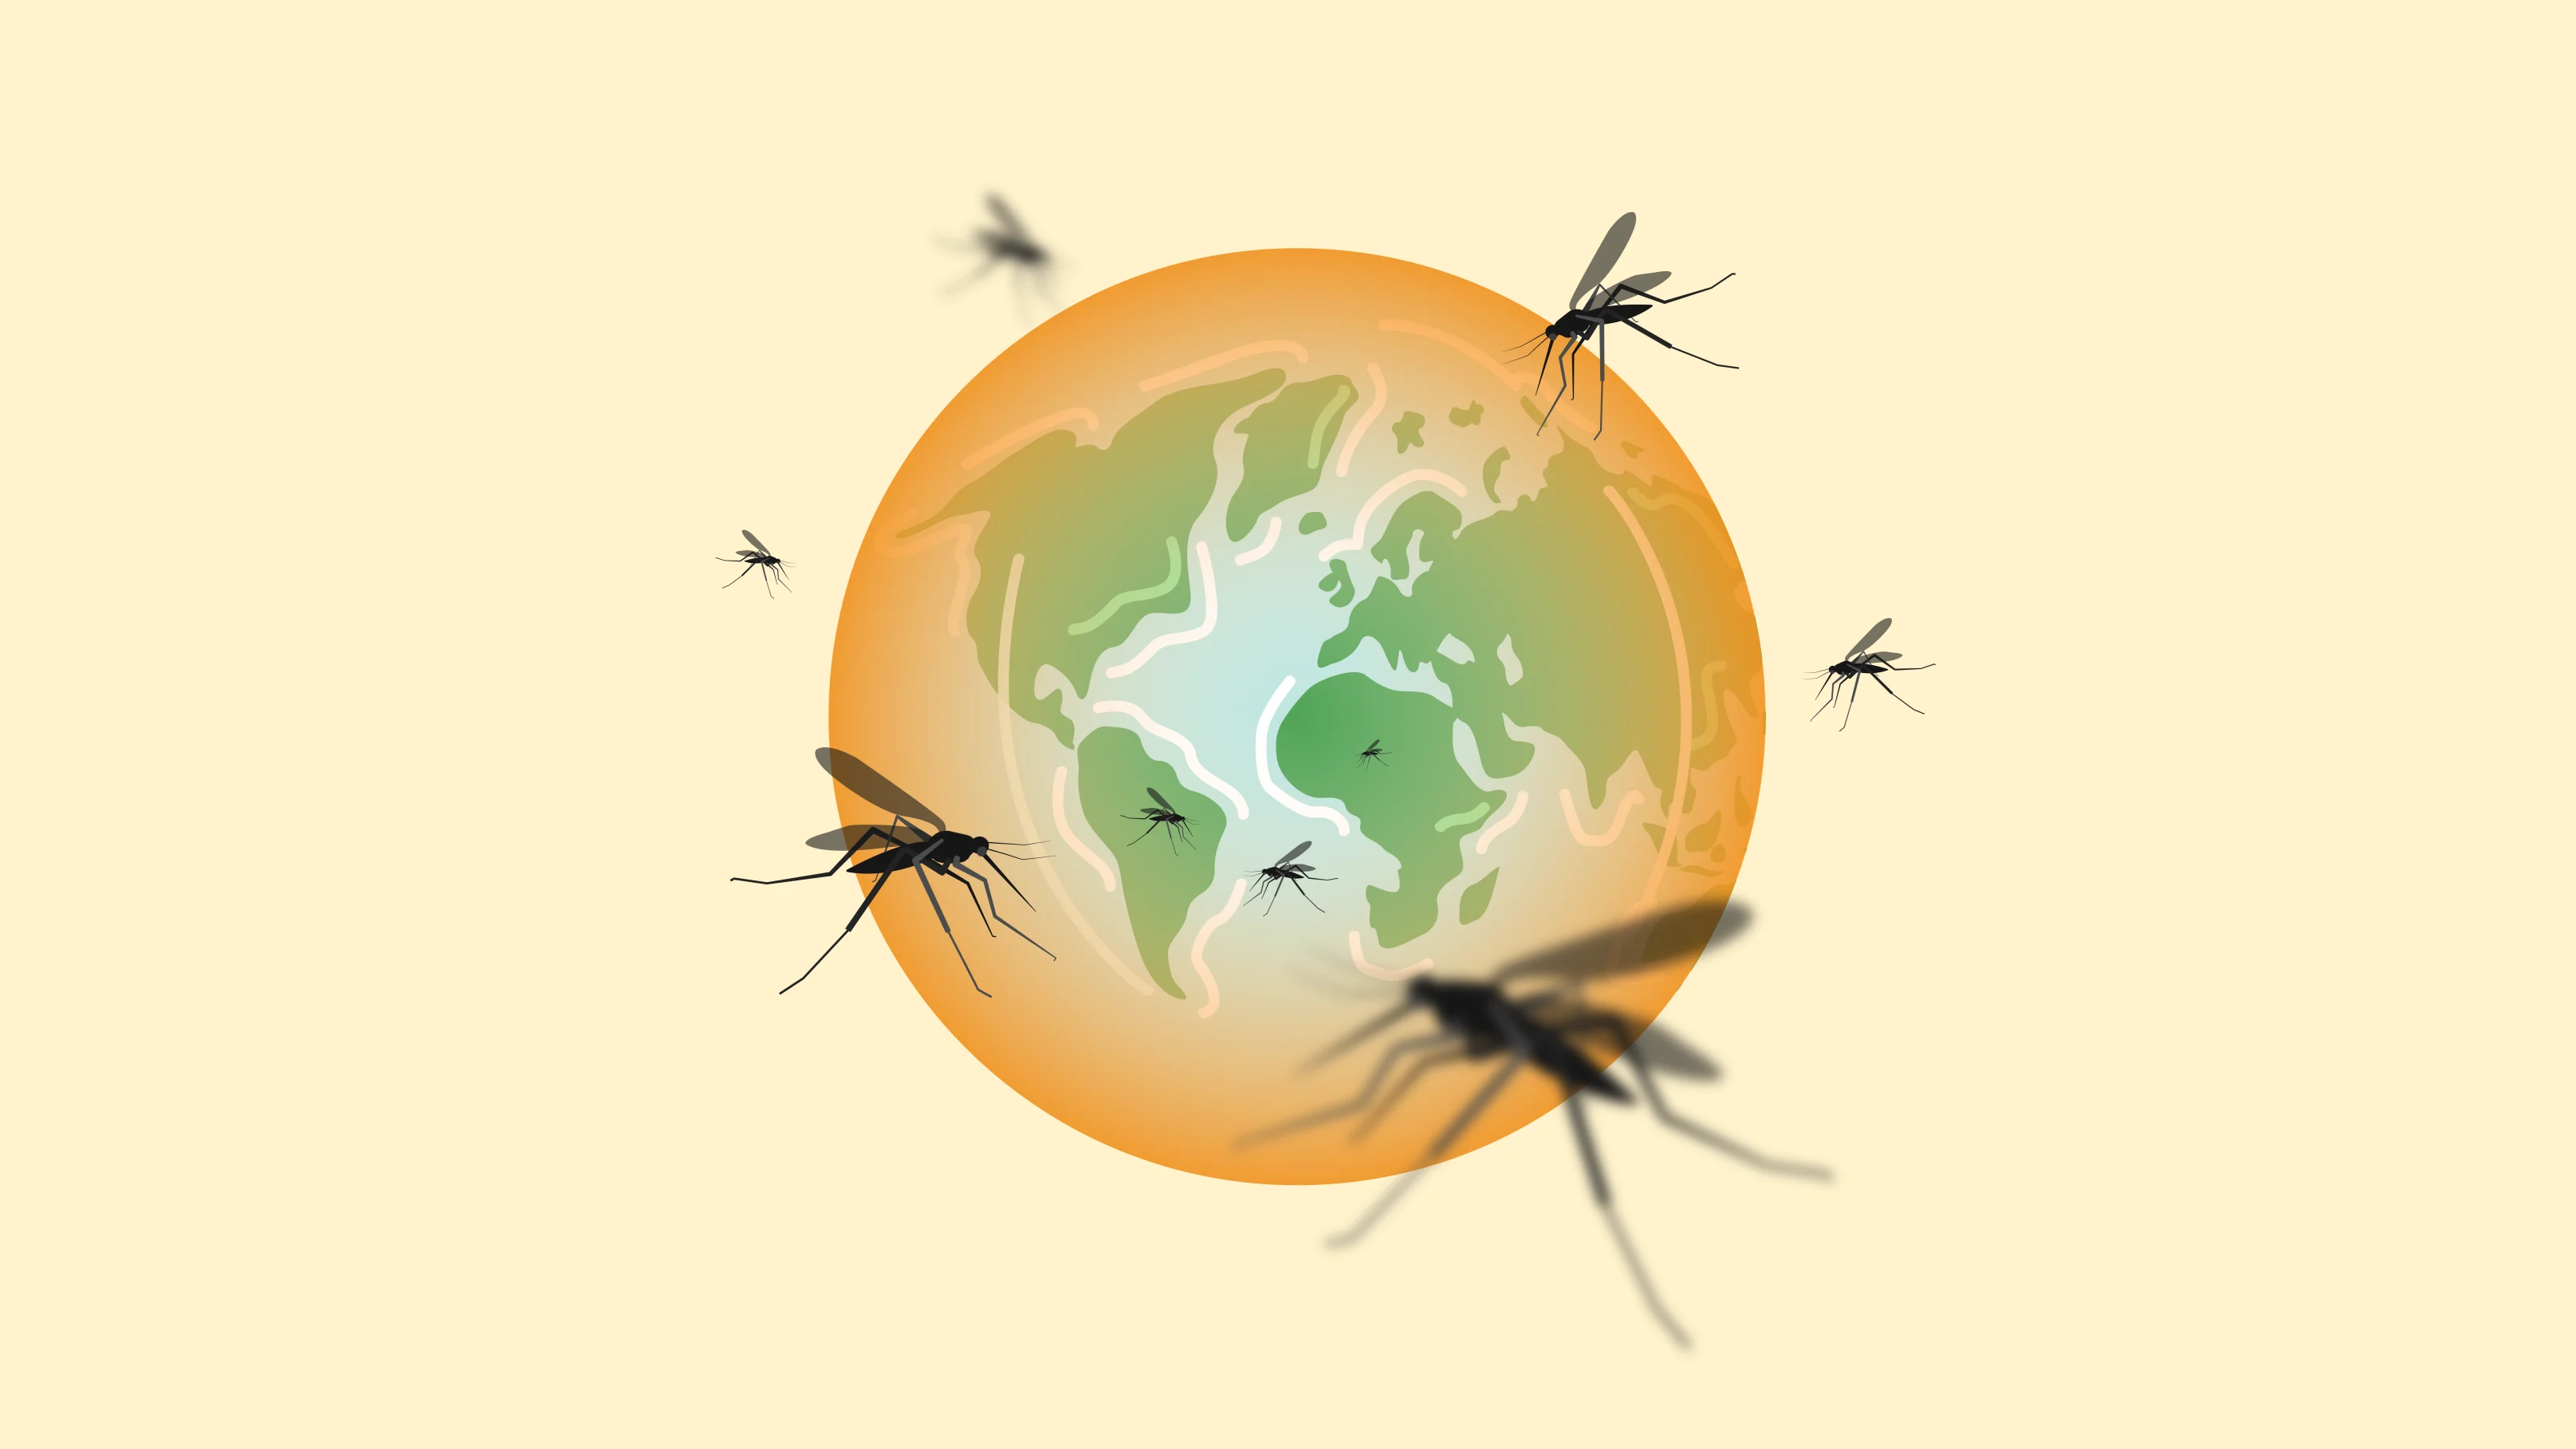 Yellow fever: The next big climate change-induced health threat?